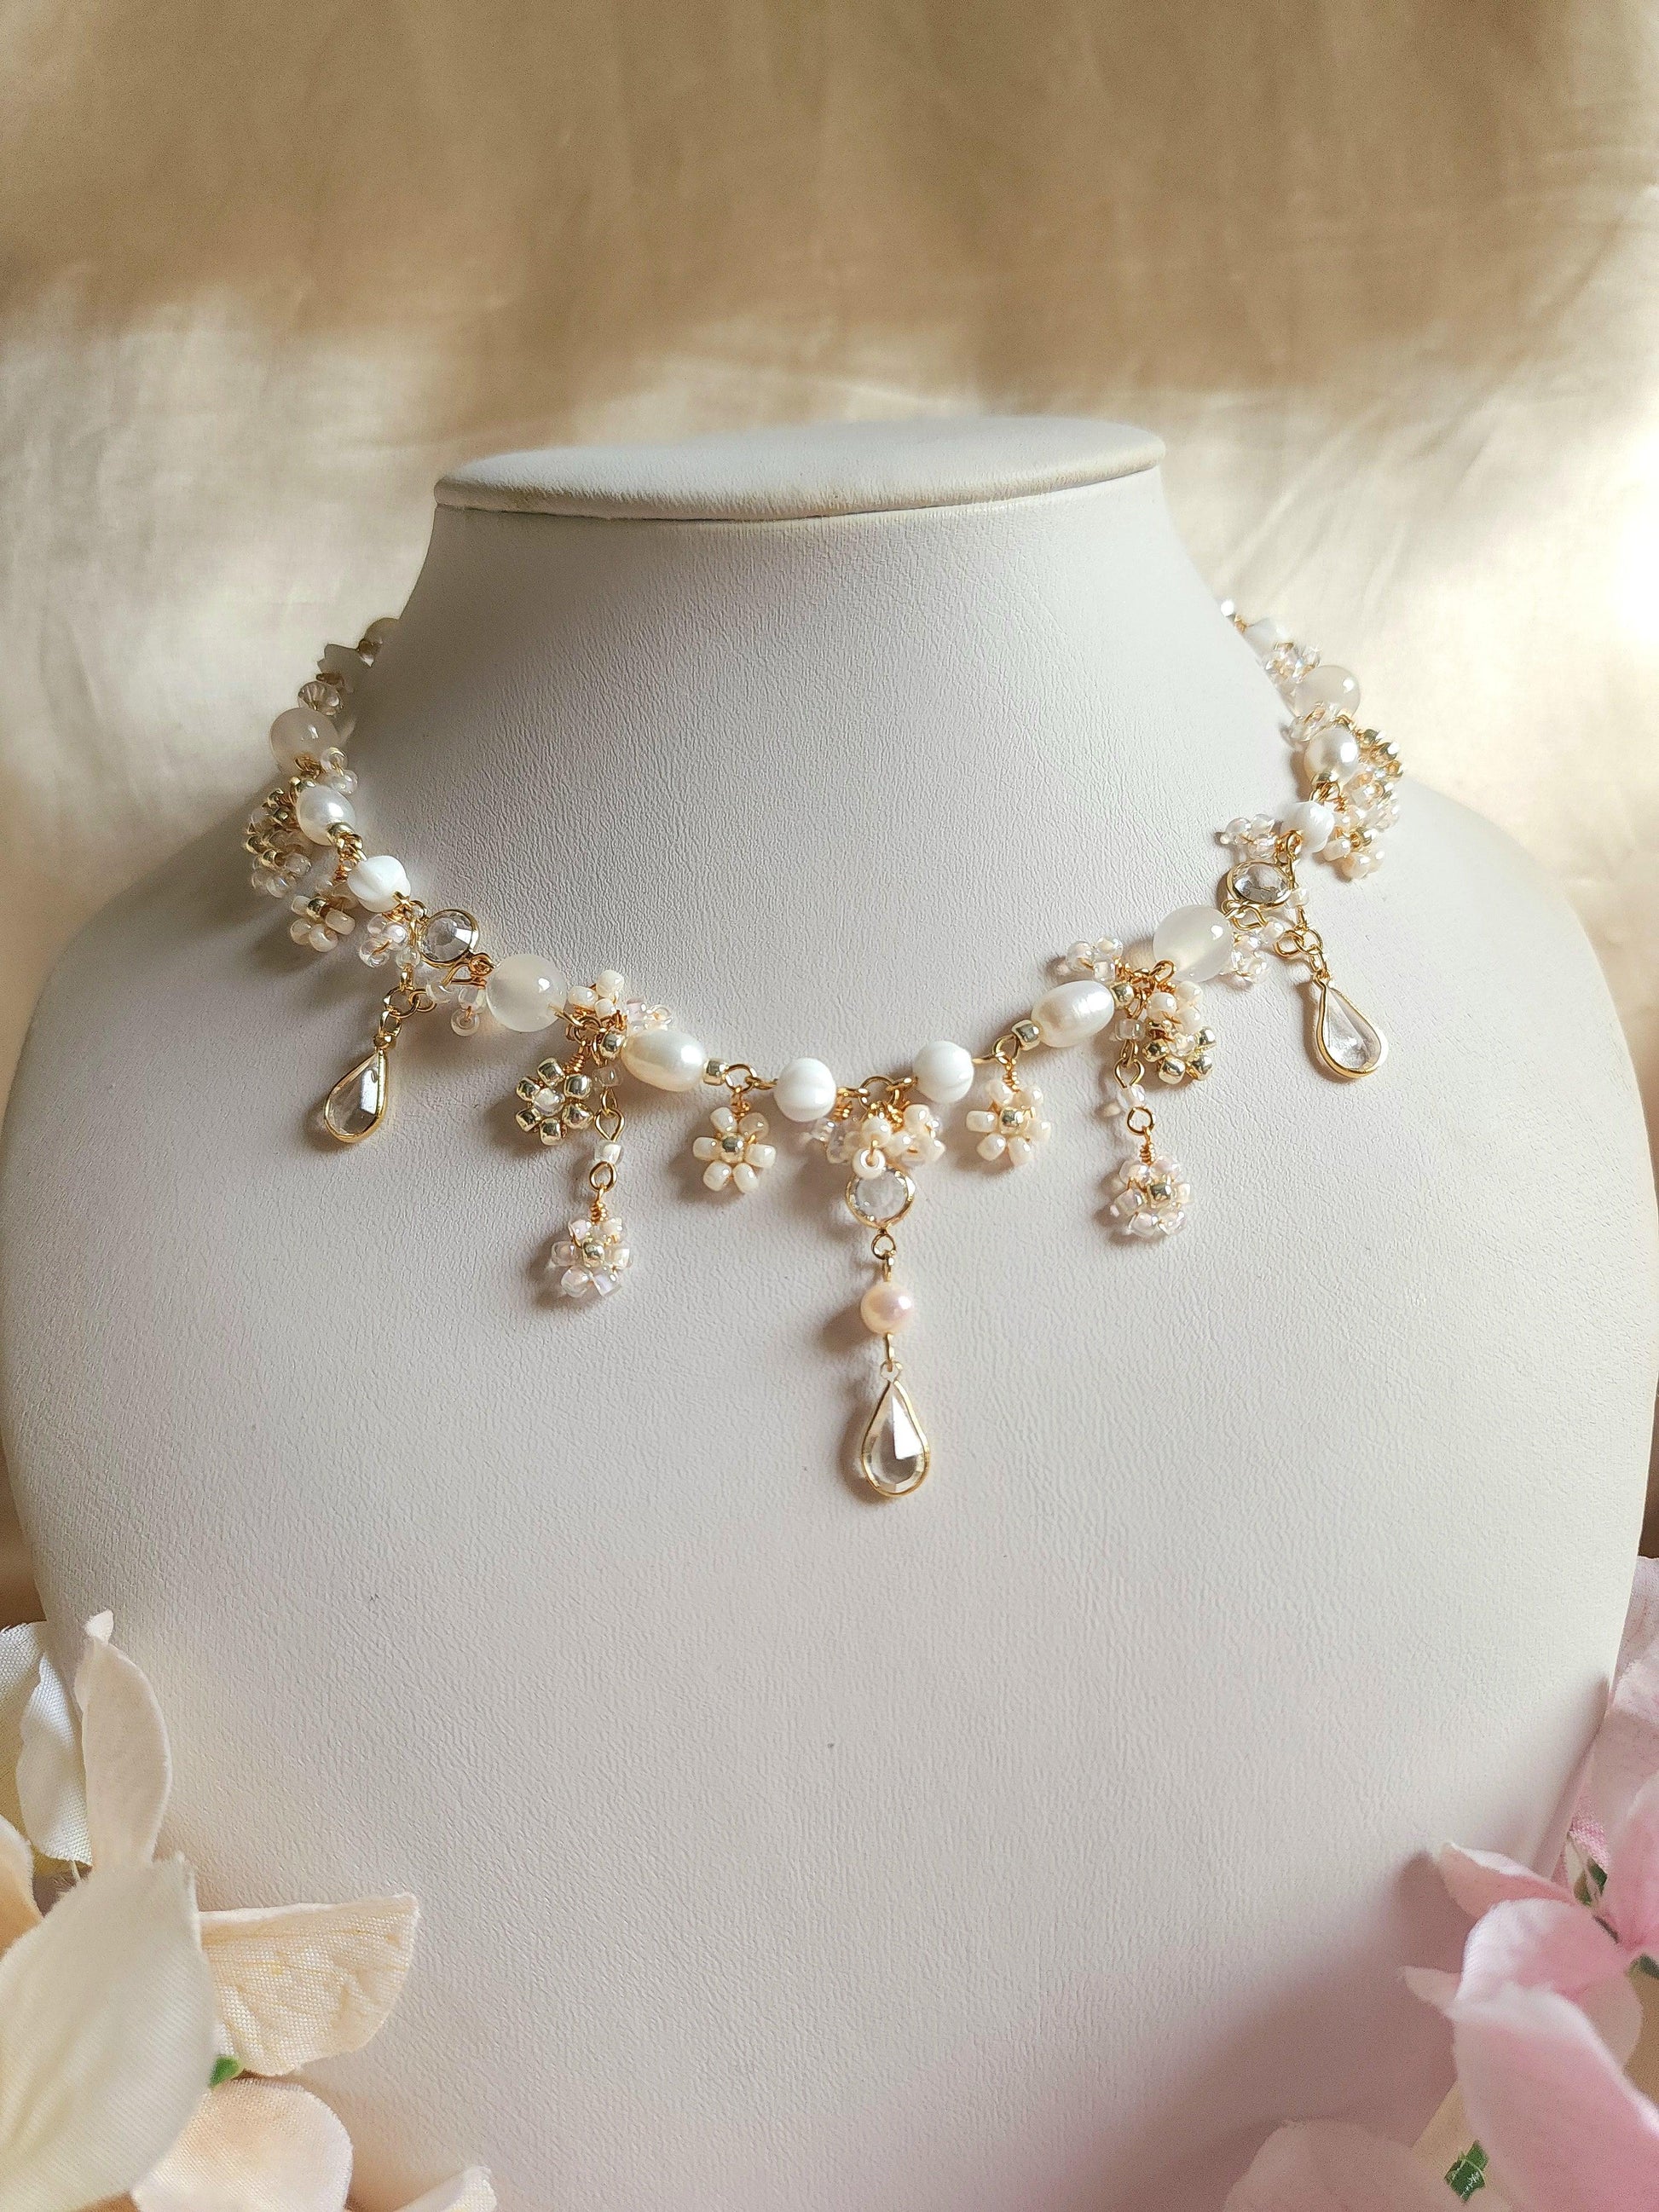 Snowy Stardrops Necklace - By Cocoyu